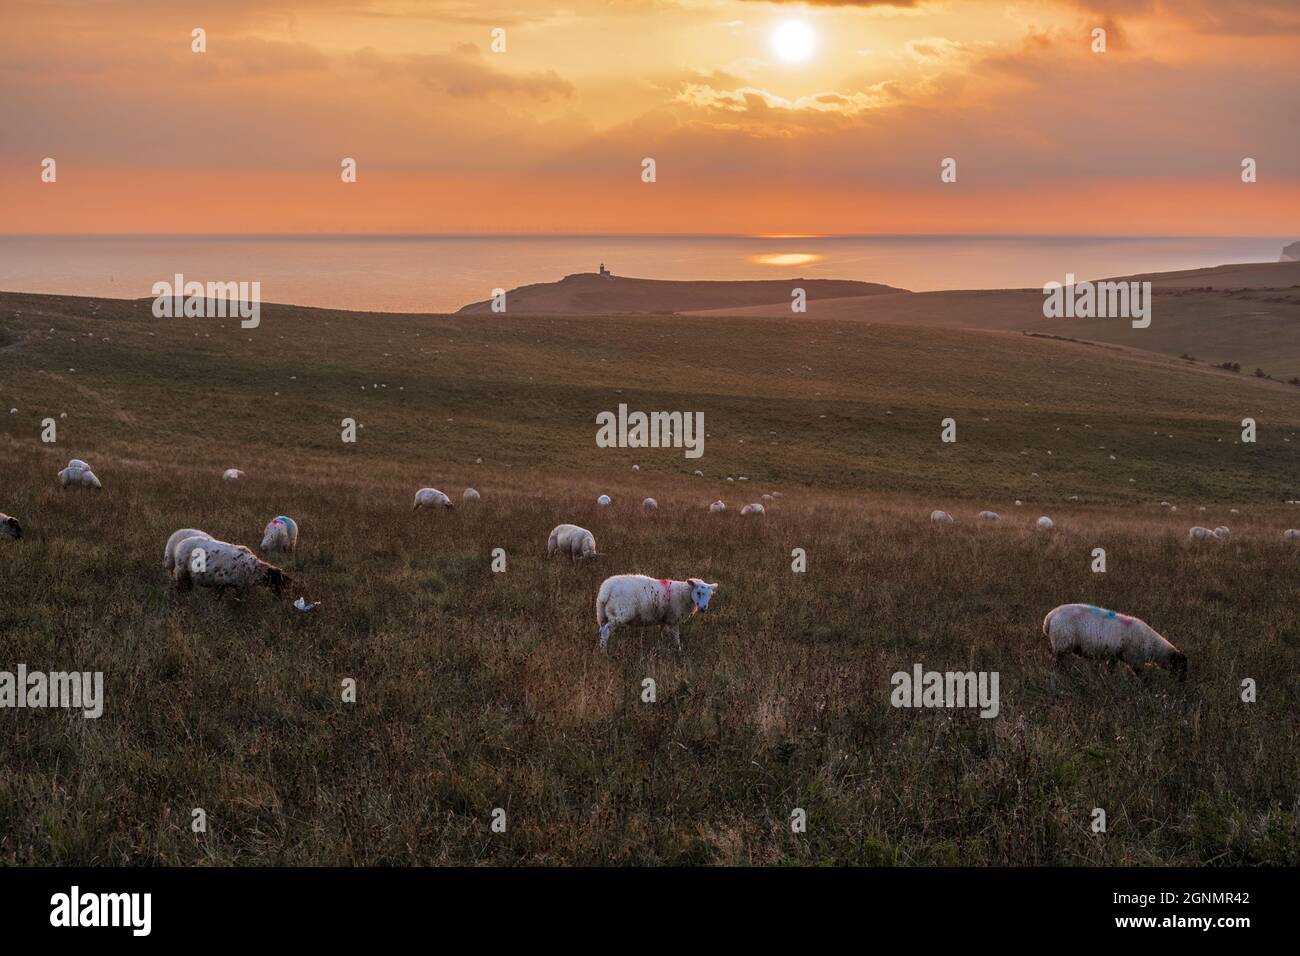 Sheep on The Sussex South Downs at sunset. Belle Tout lighthouse on the horizon. Near Eastbourne, E Sussex UK. Stock Photo